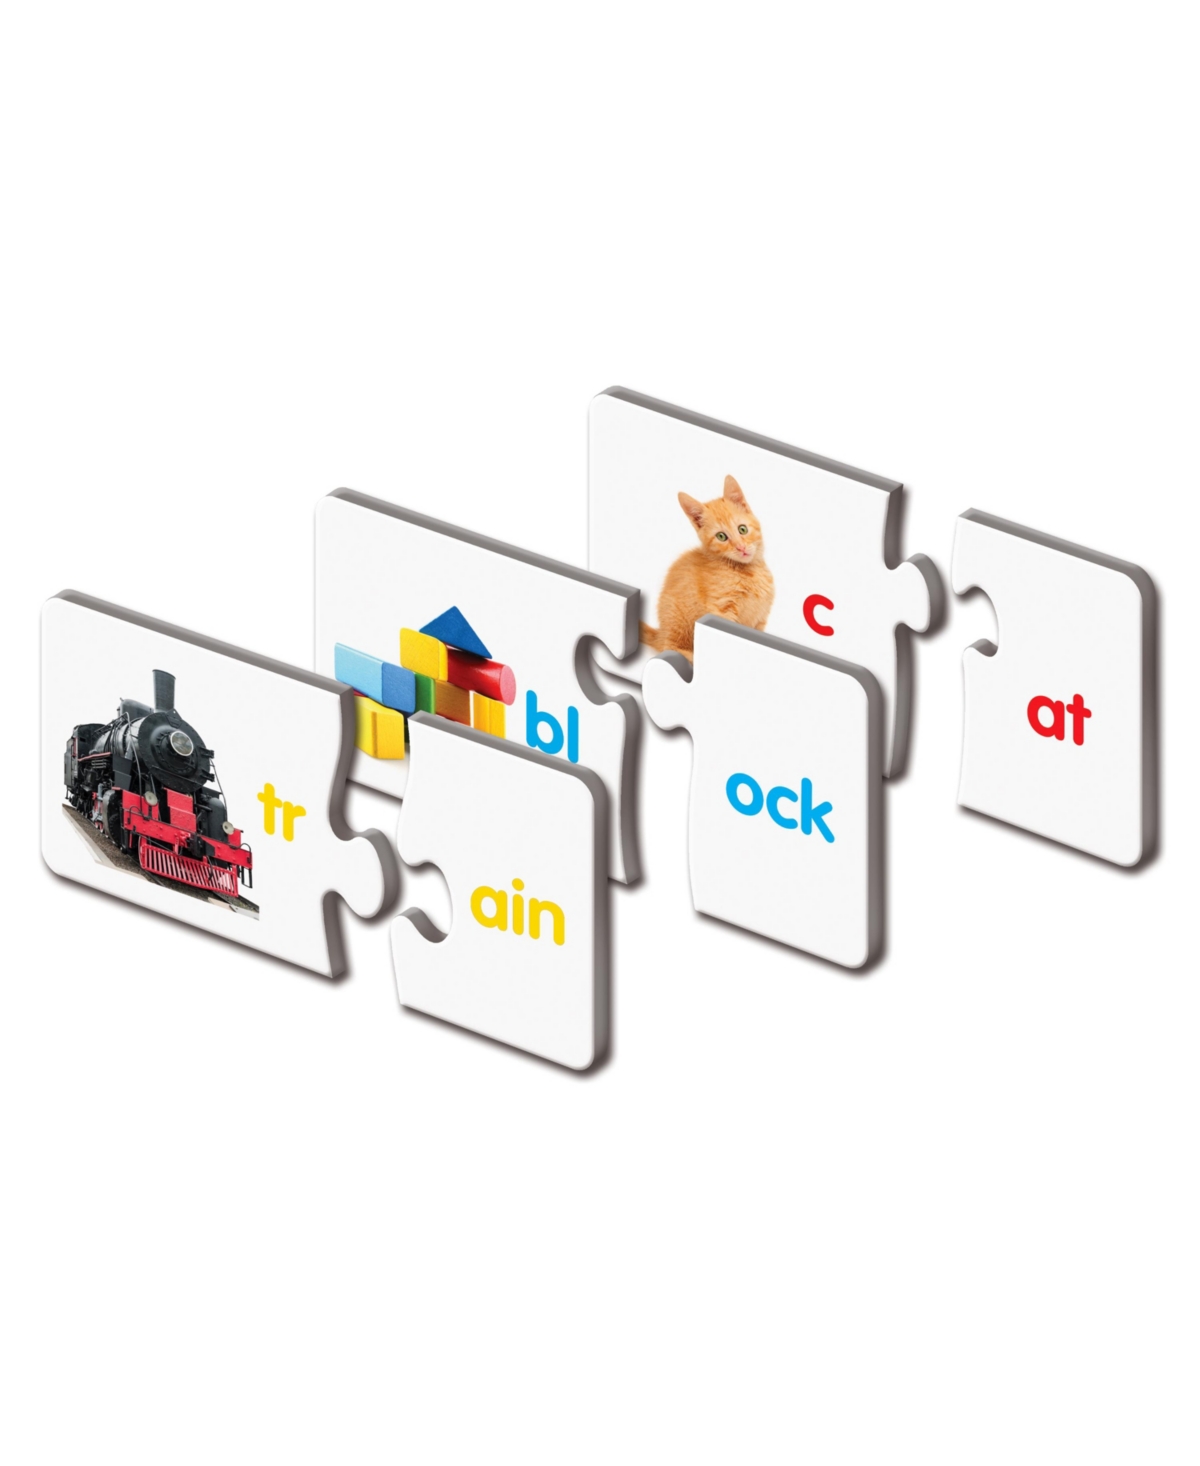 Shop The Learning Journey Match It Words Set Of 30 Self-correcting Reading Puzzle Match The Words To Images In Multi Colored